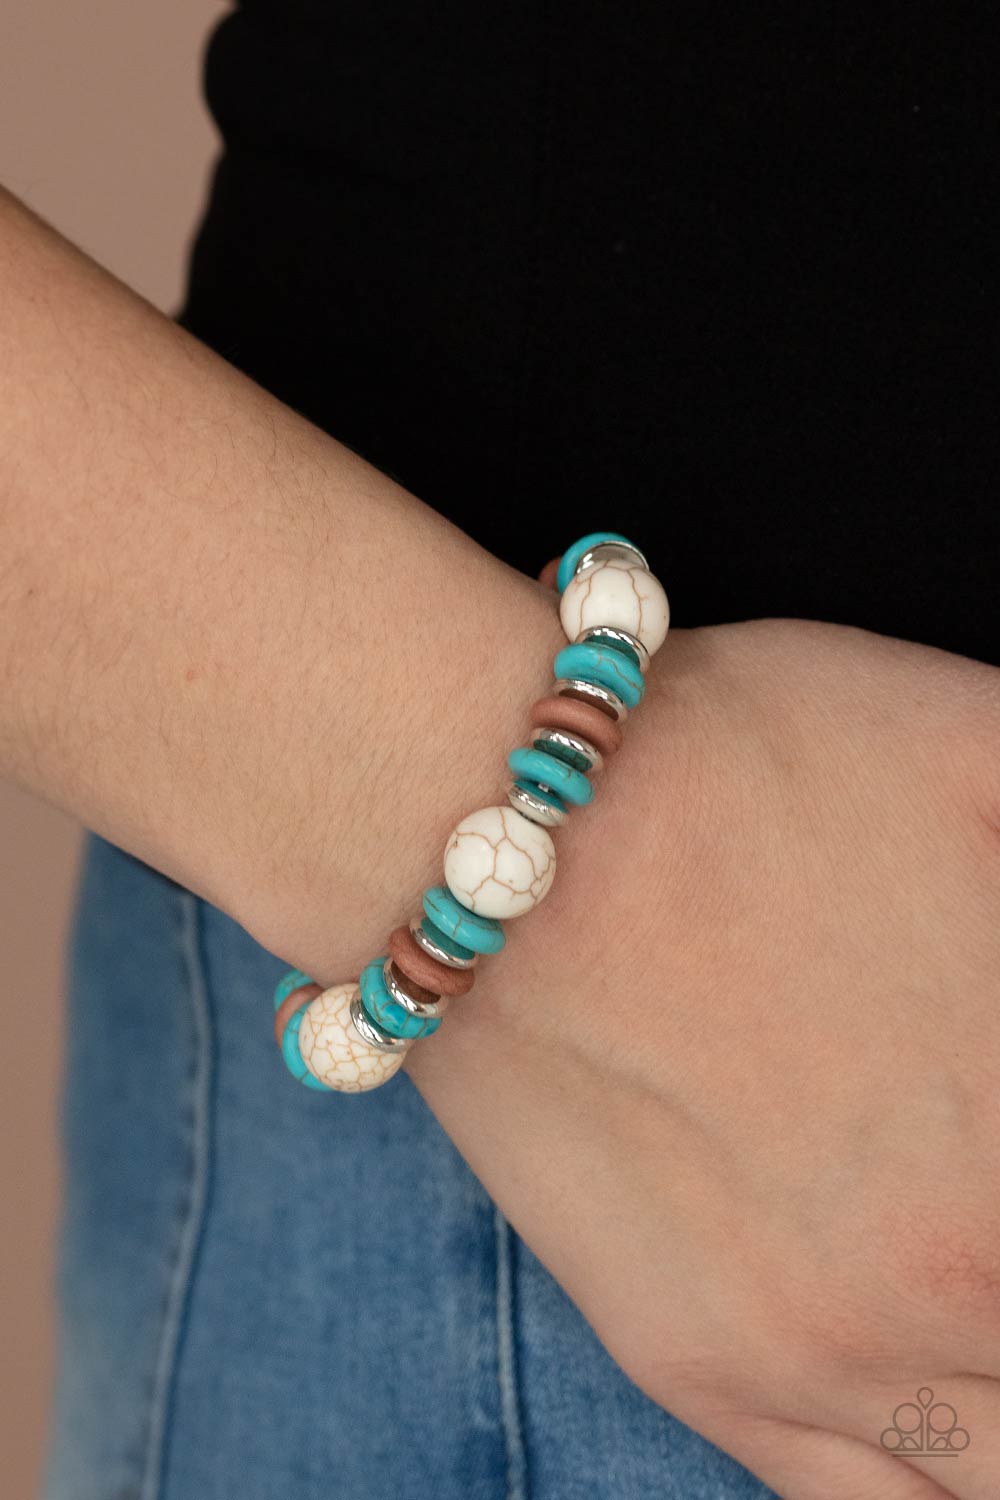 Rustic Rival Multi White and Turquoise Stone Bracelet - Paparazzi Accessories- model - CarasShop.com - $5 Jewelry by Cara Jewels